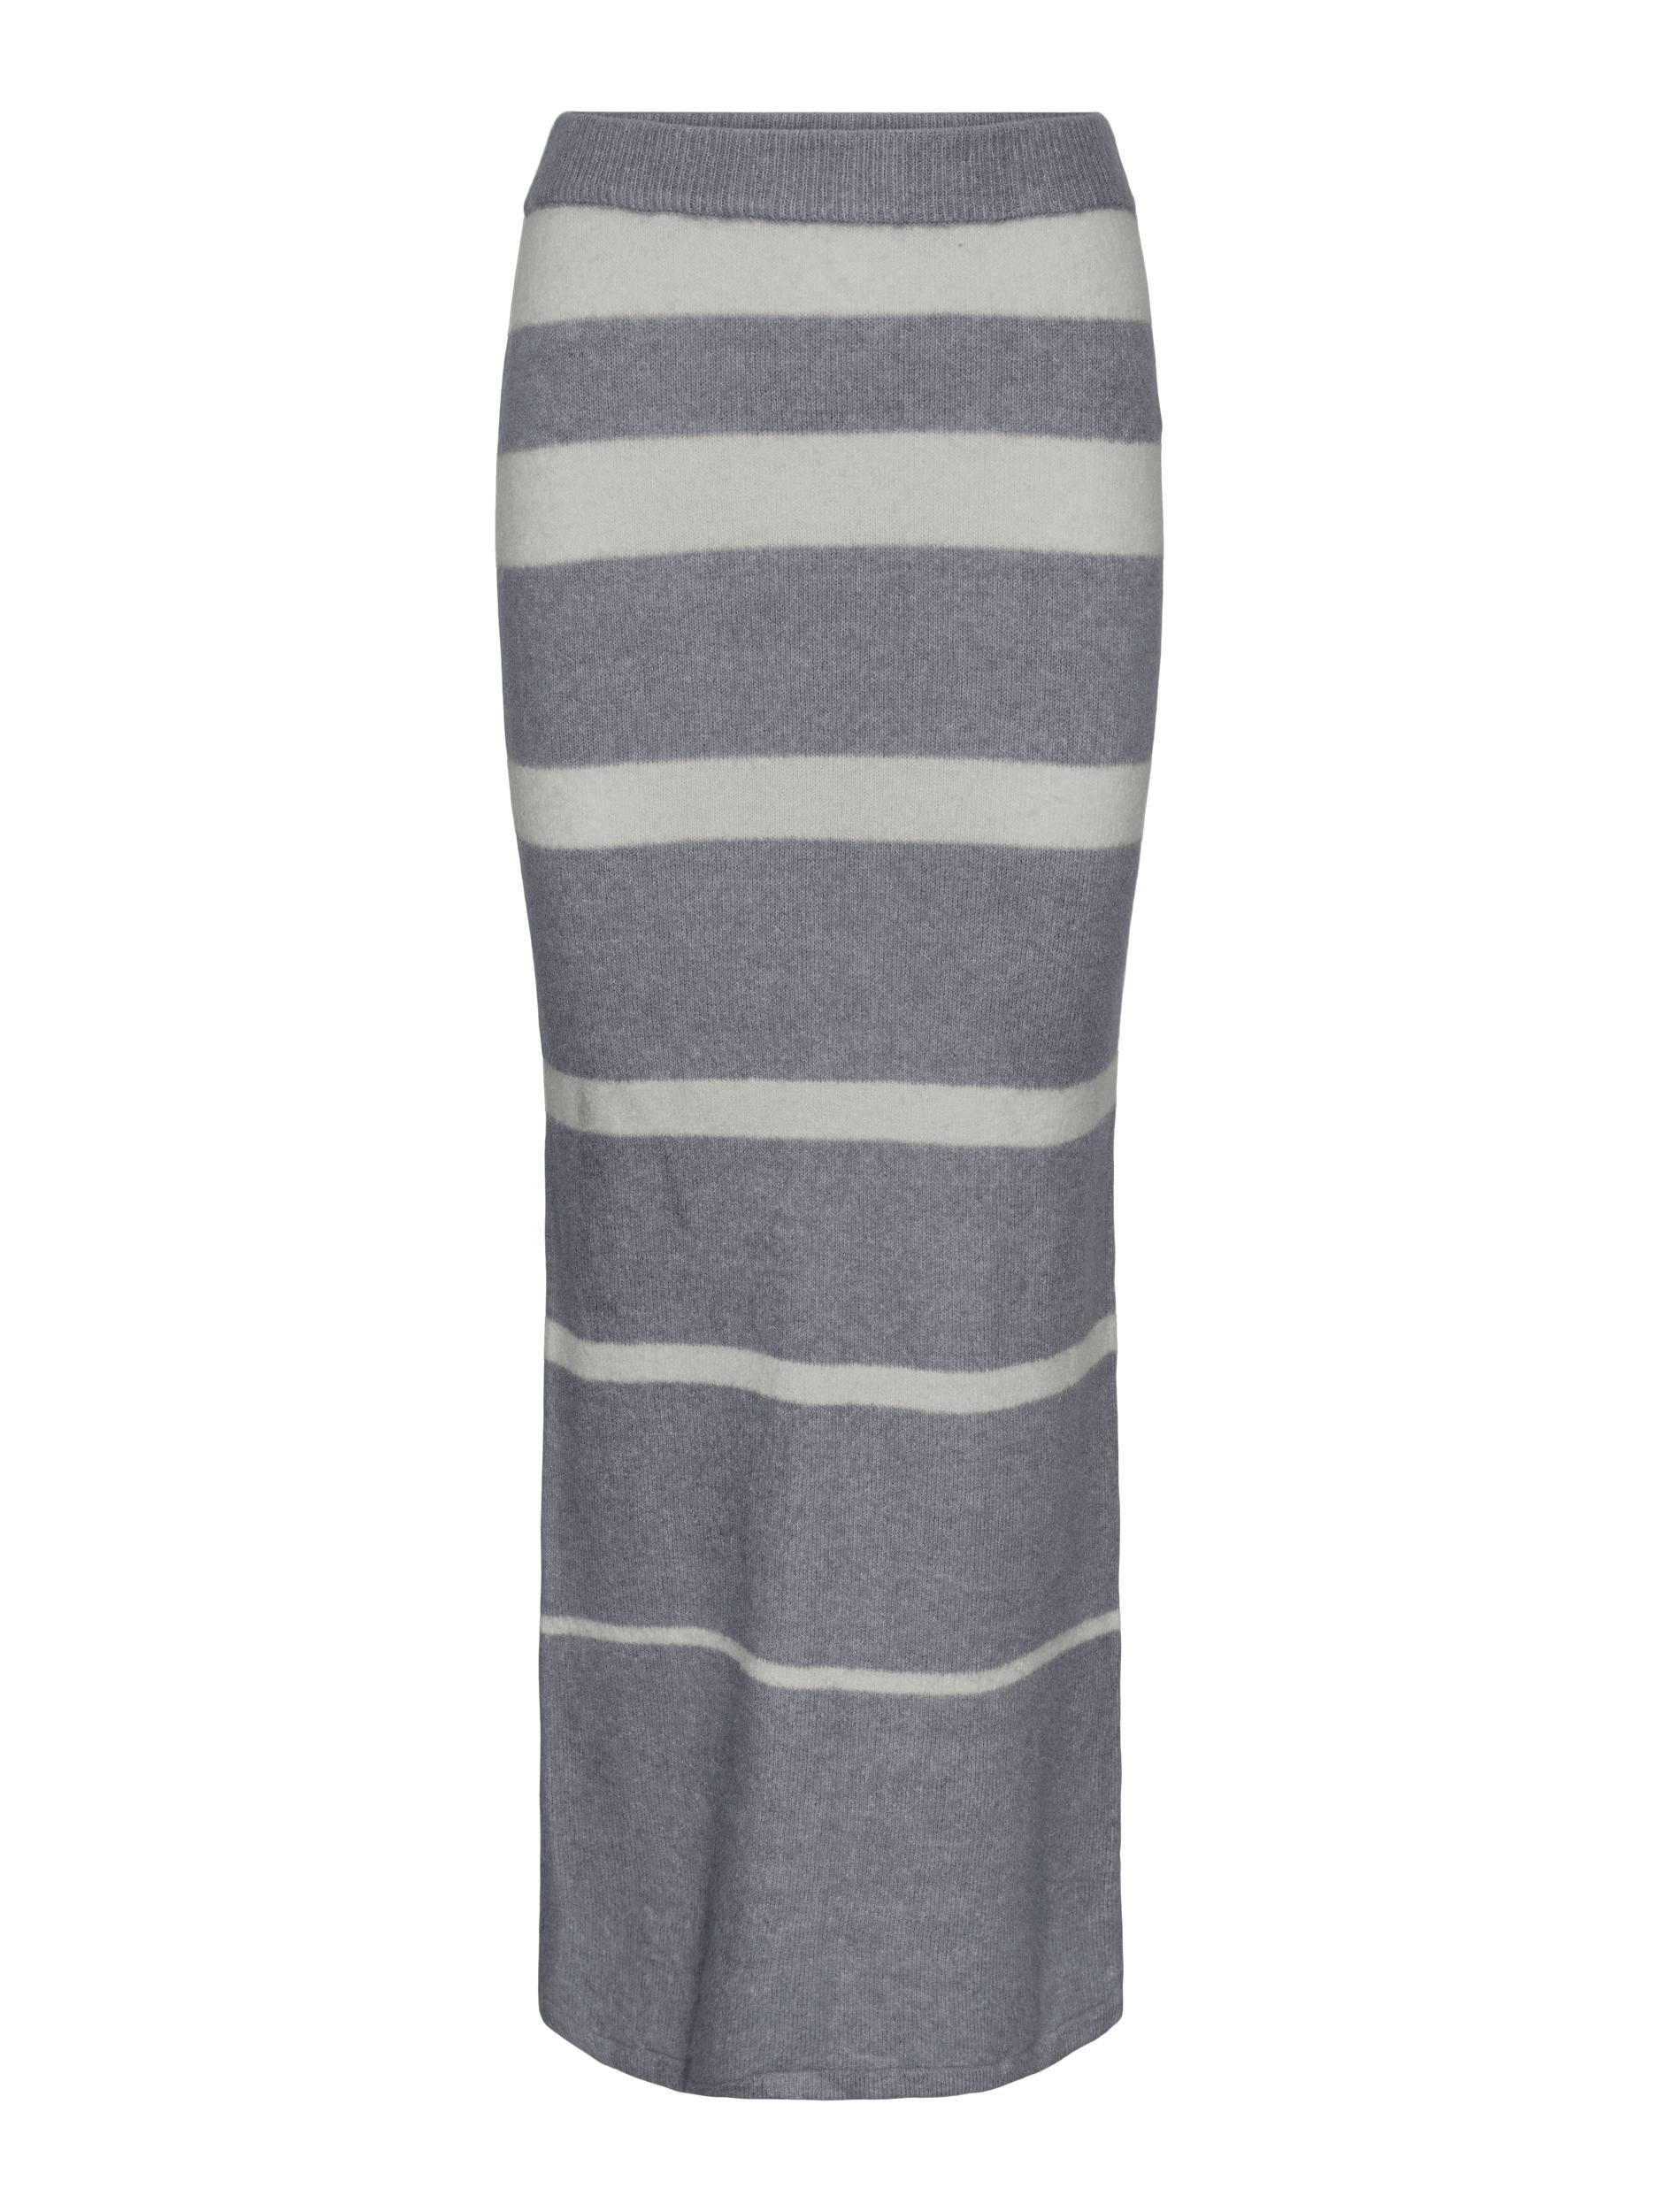 Pieces gray striped midi skirt with slit